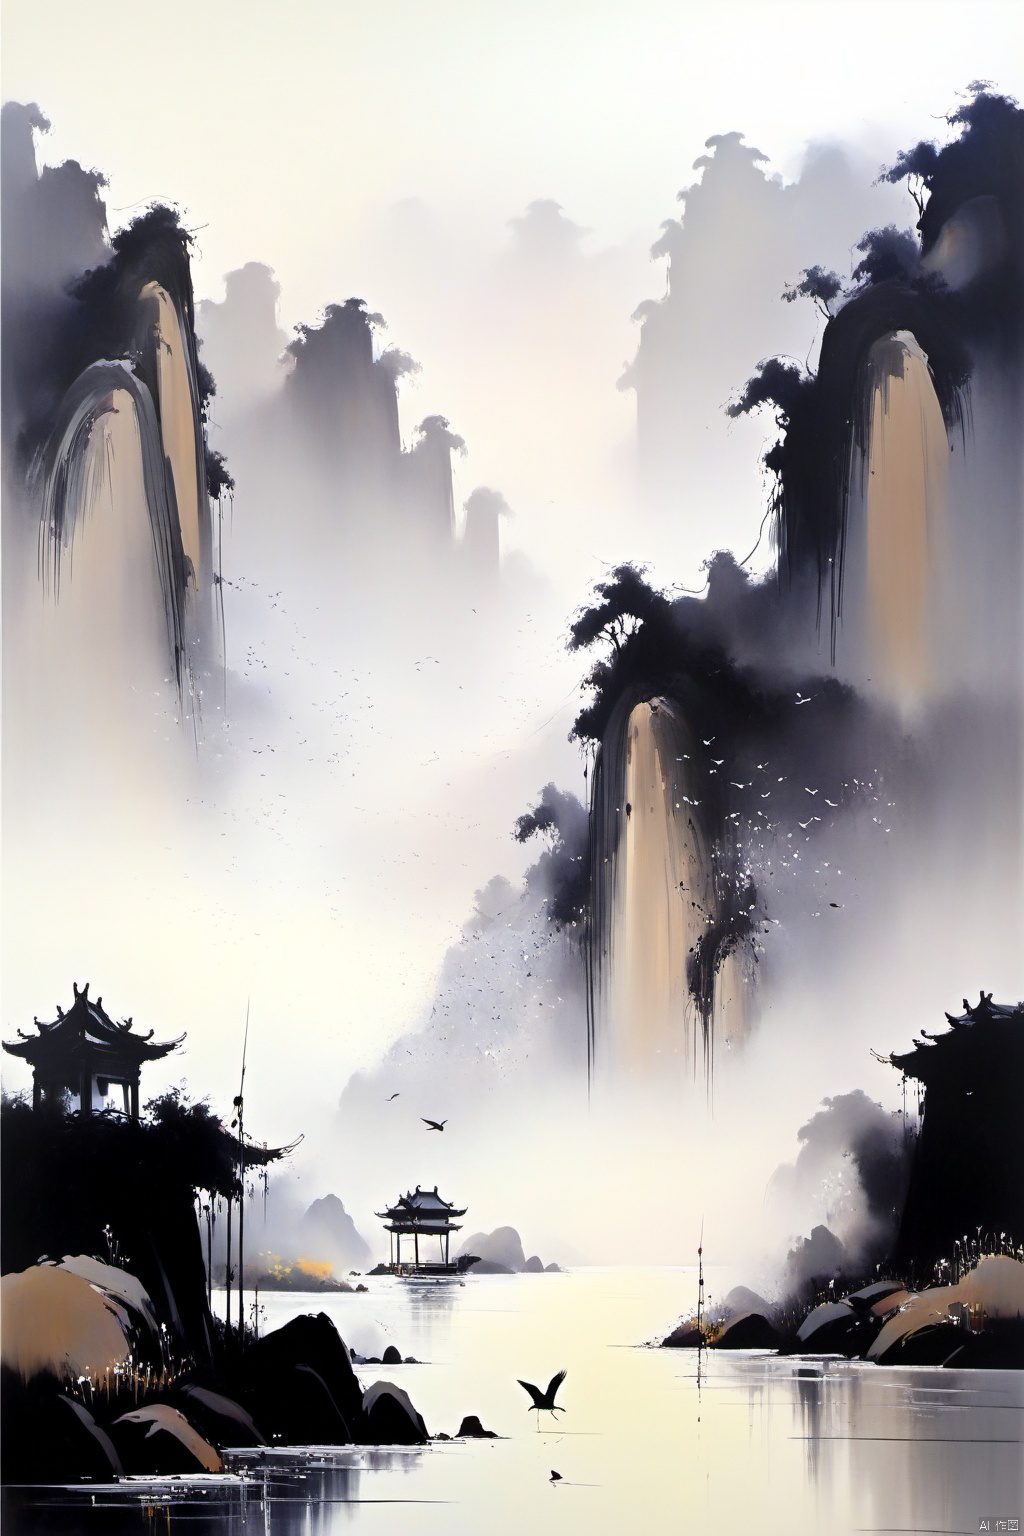  Wu Guanzhong paints a picture, the painting depicts a crane, dancing in the bamboo thickets, full compliance with the style of Wu Guanzhong, combining traditional Chinese ink painting techniques with Western painting concepts, unique visual effects using color and lines, (best quality, perfect masterpiece, byyue, Representative work, official art, Professional, high details, Ultra intricate detailed:1.3)